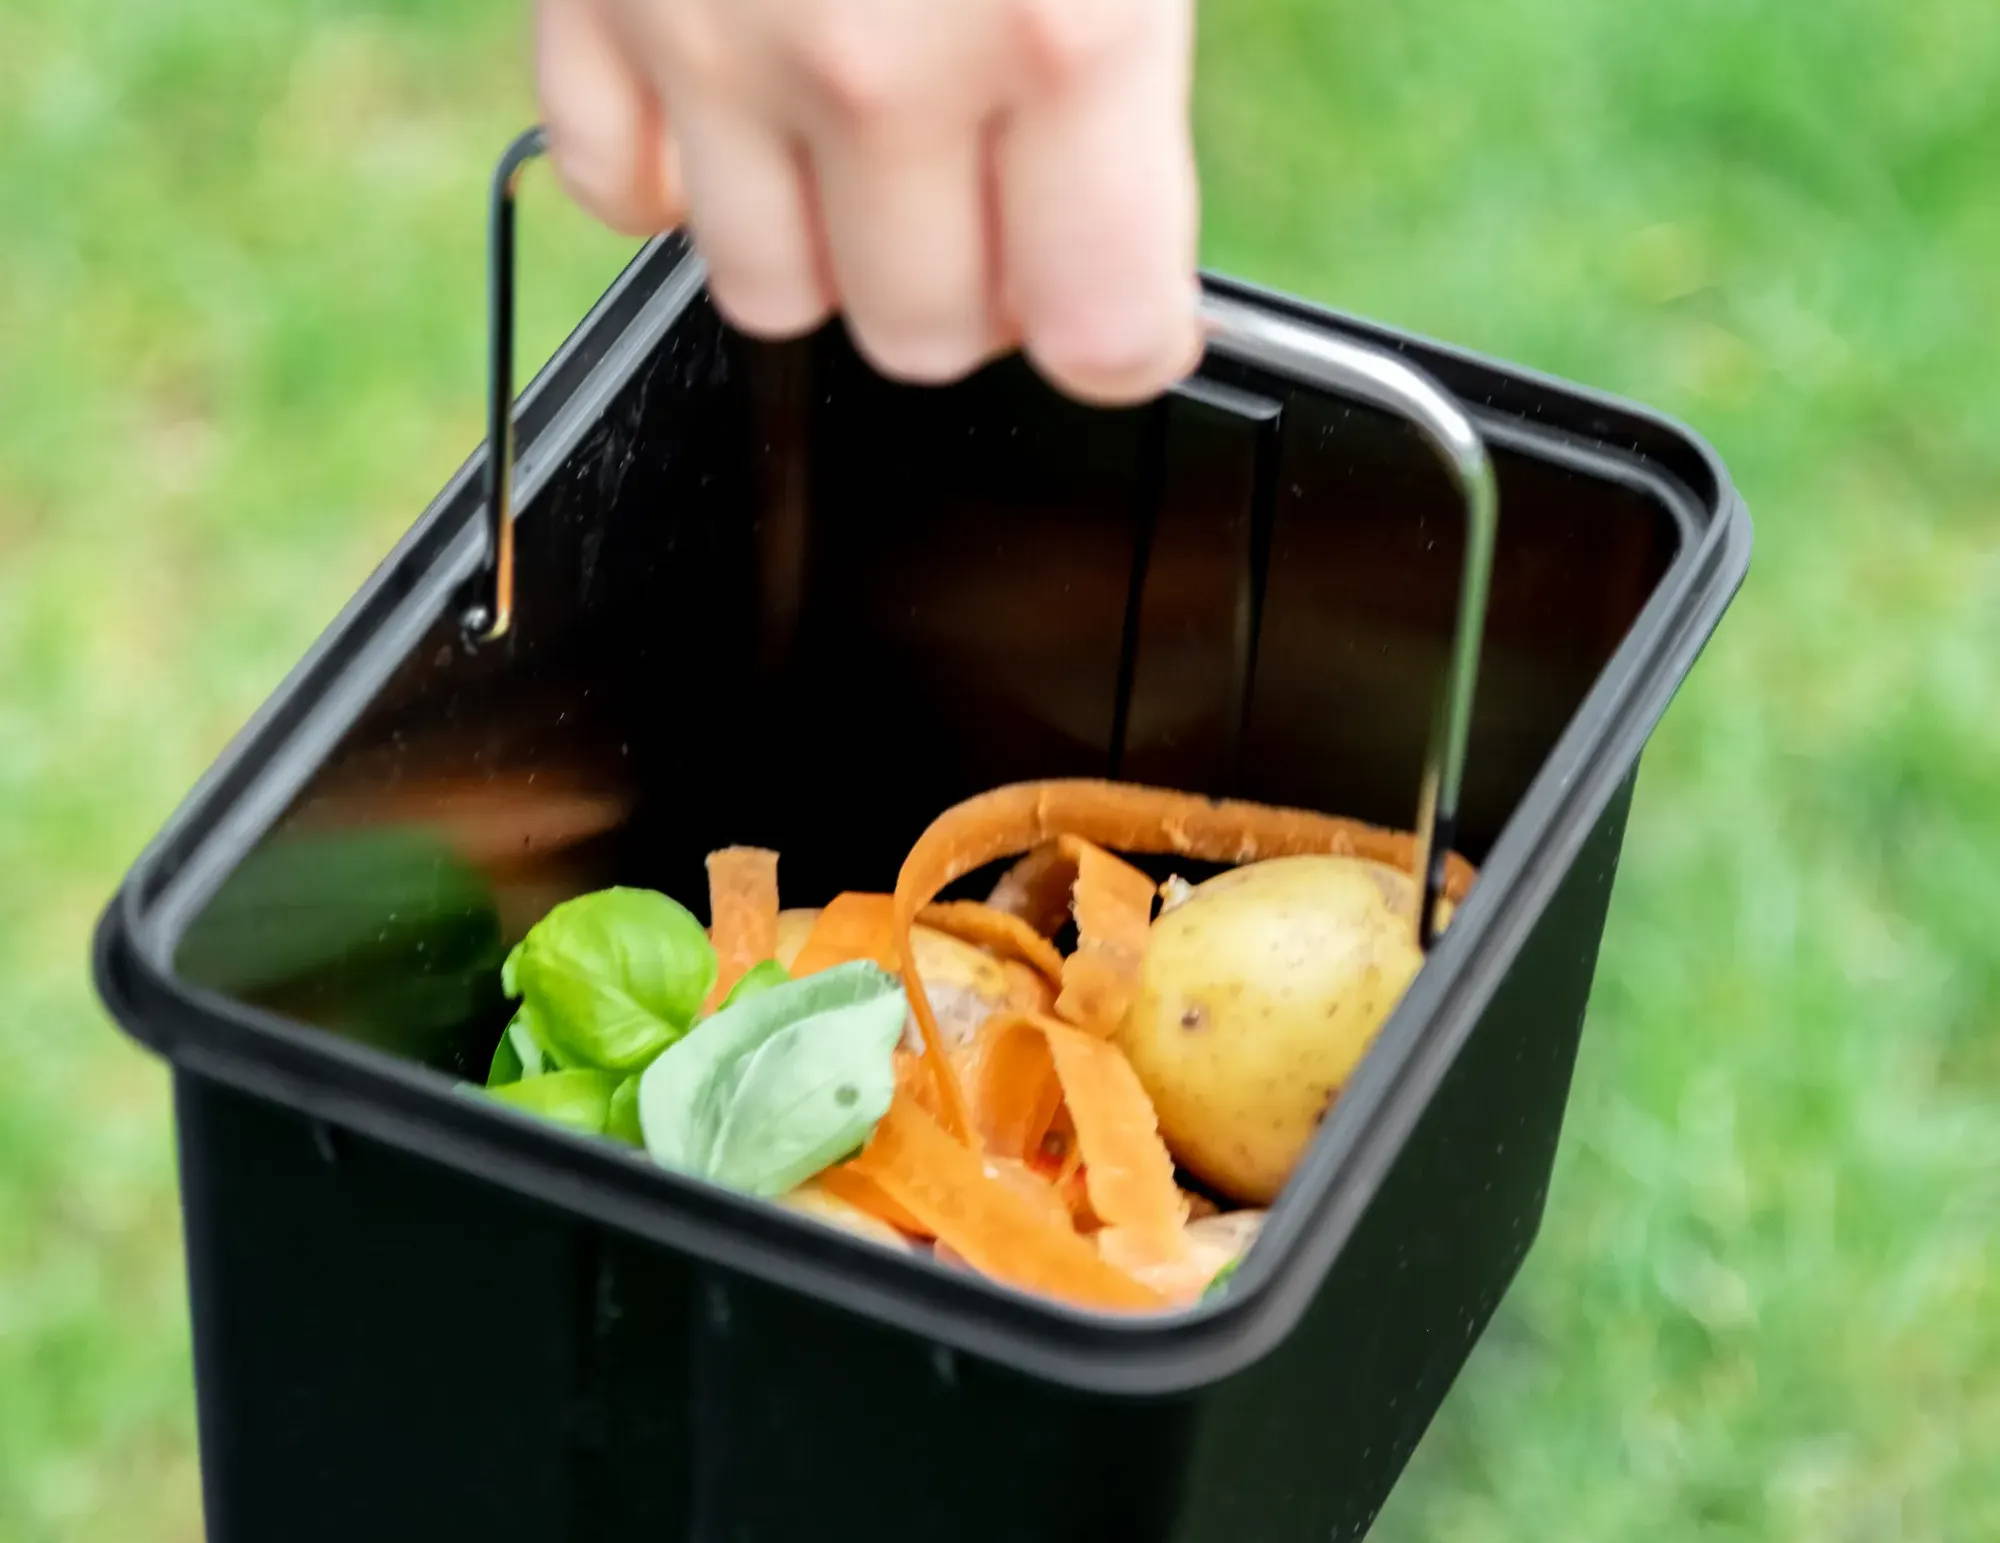 How to Rotate Your Food Storage (So Nothing Goes to Waste!) - Six